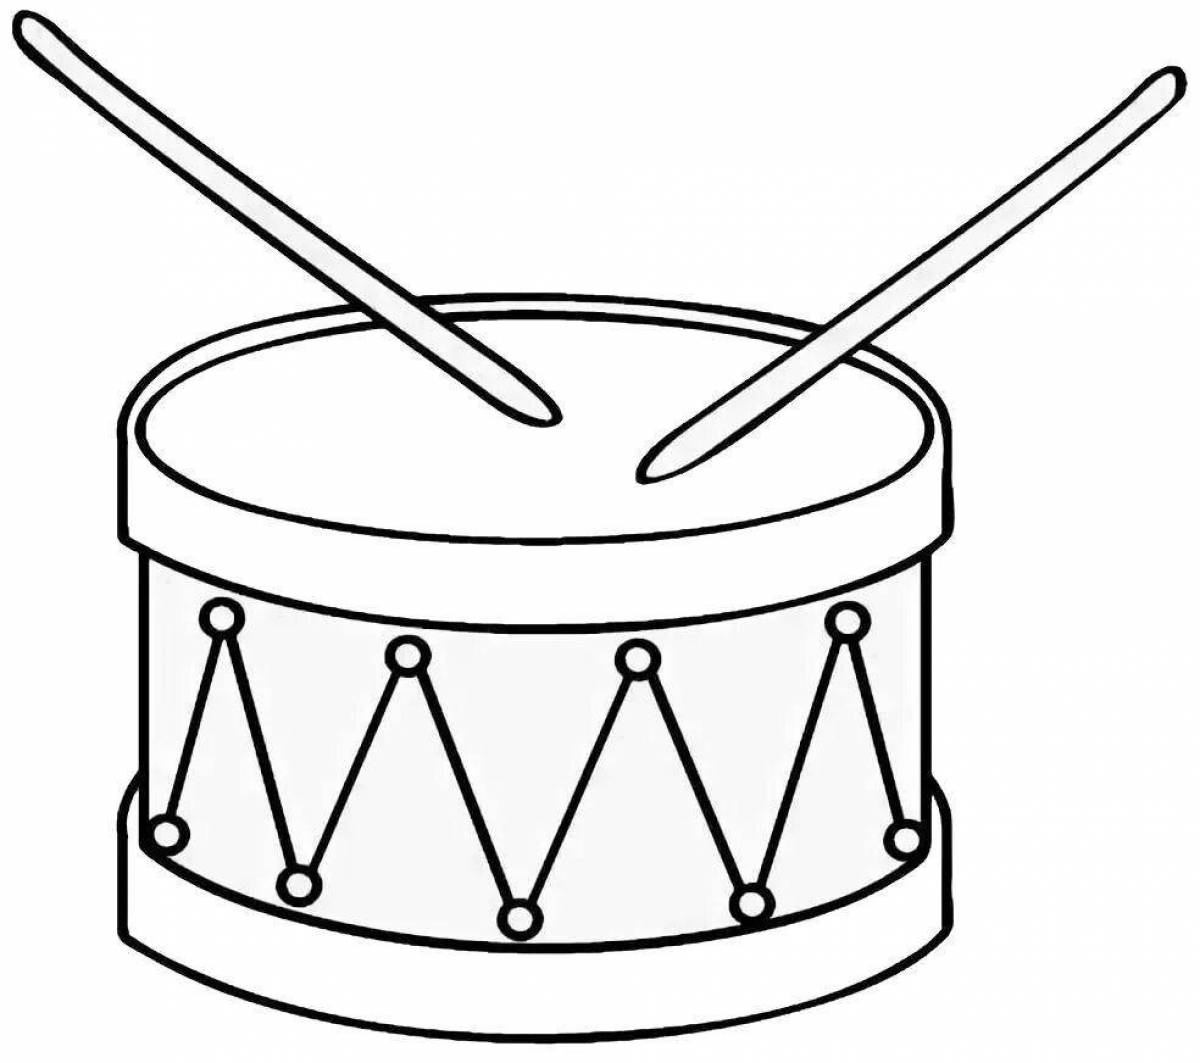 Coloring page with drums